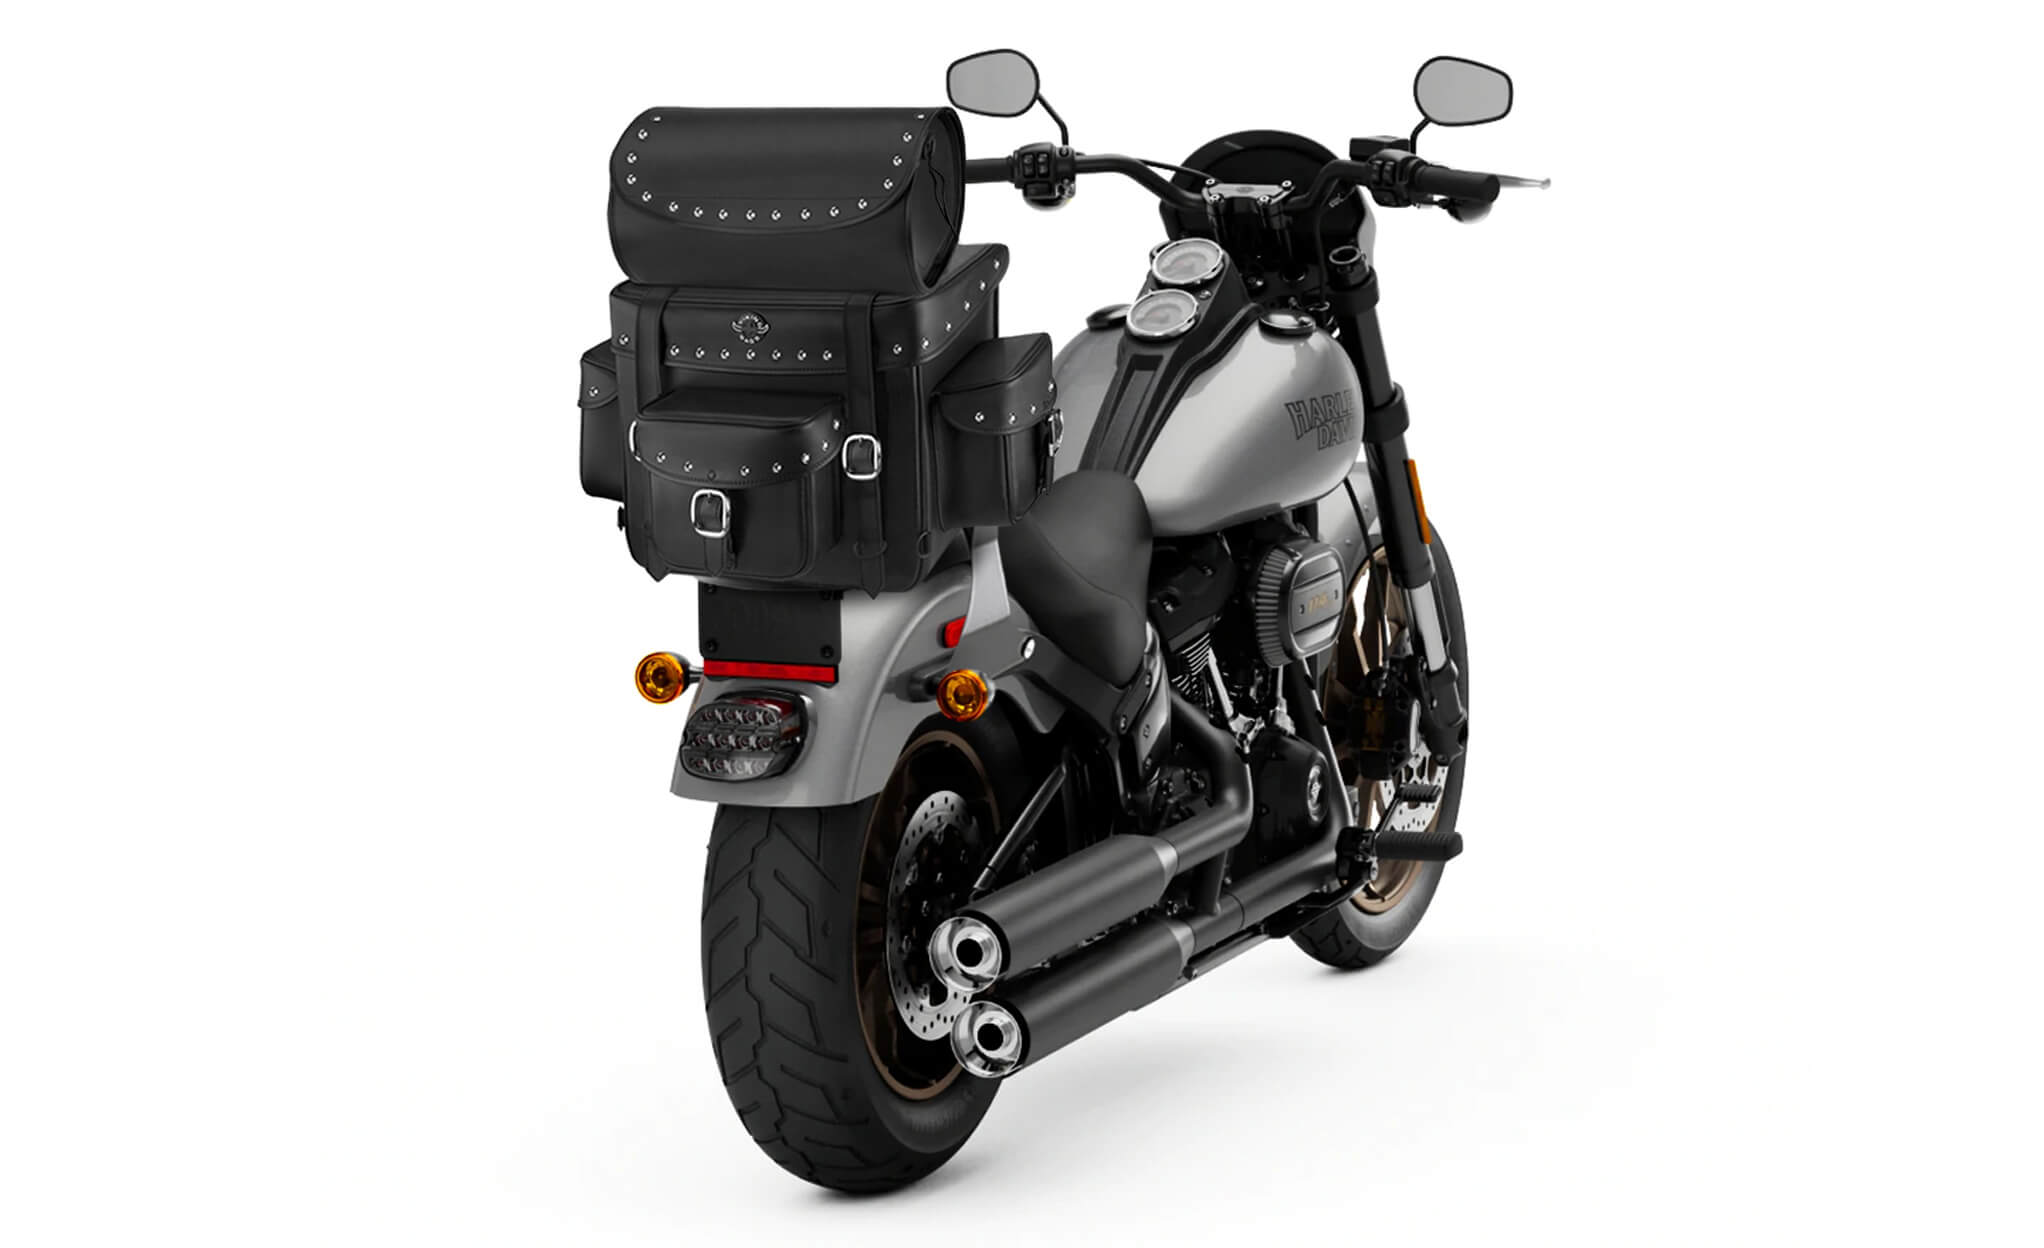 Viking Revival Series Large Indian Studded Motorcycle Sissy Bar Bag Bag on Bike View @expand